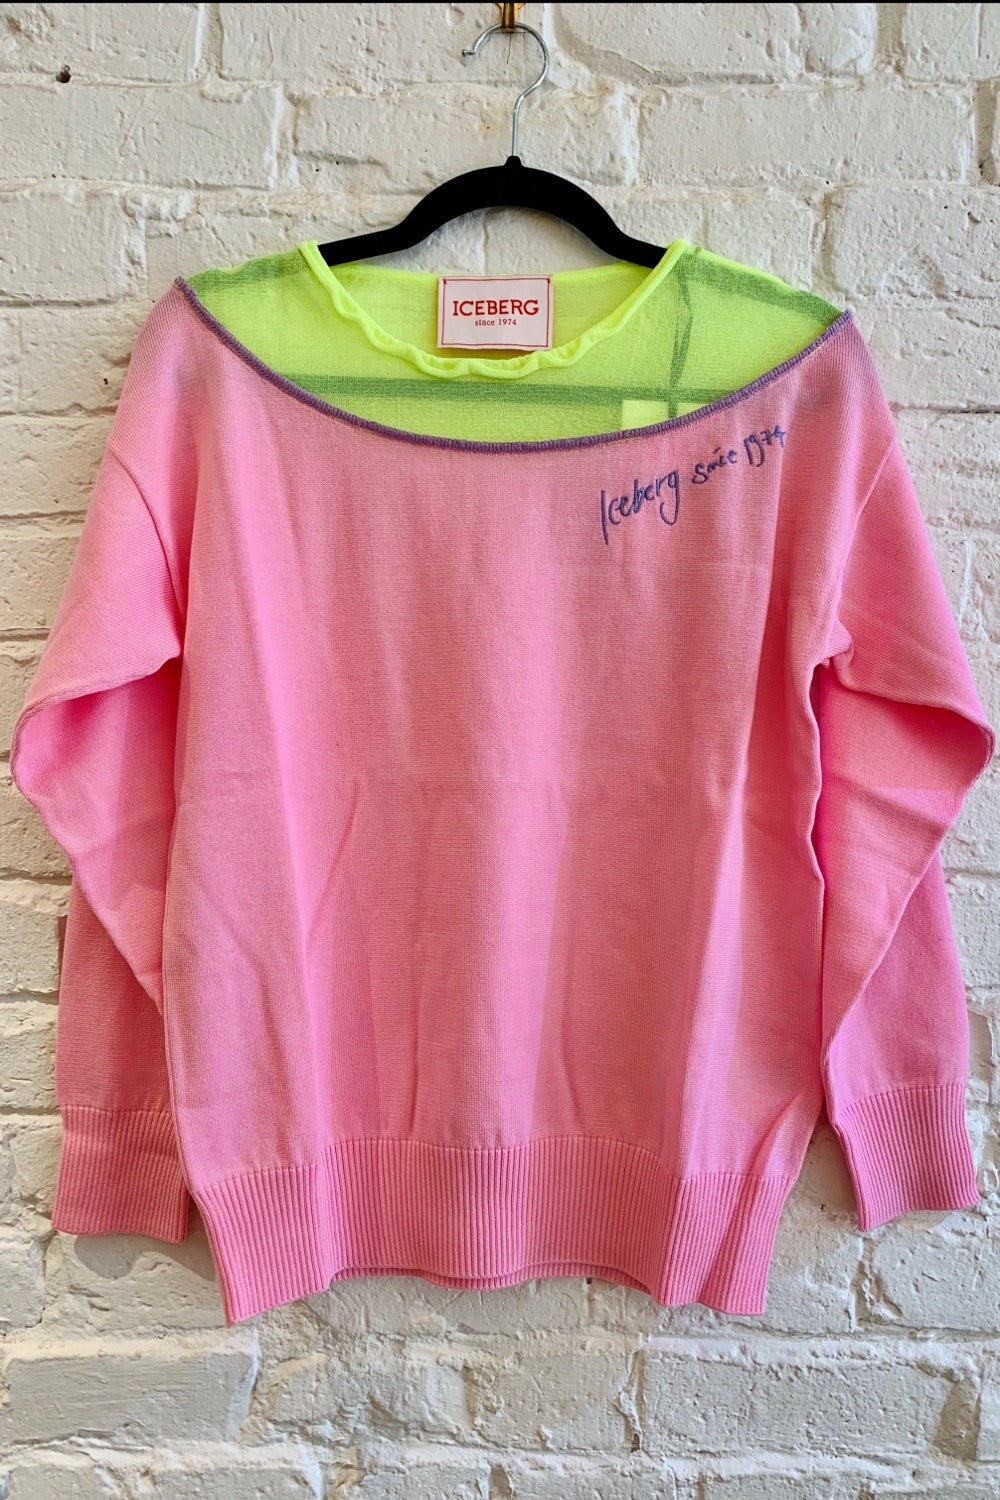 Iceberg - Neon and Pink Sweater - ouimillie